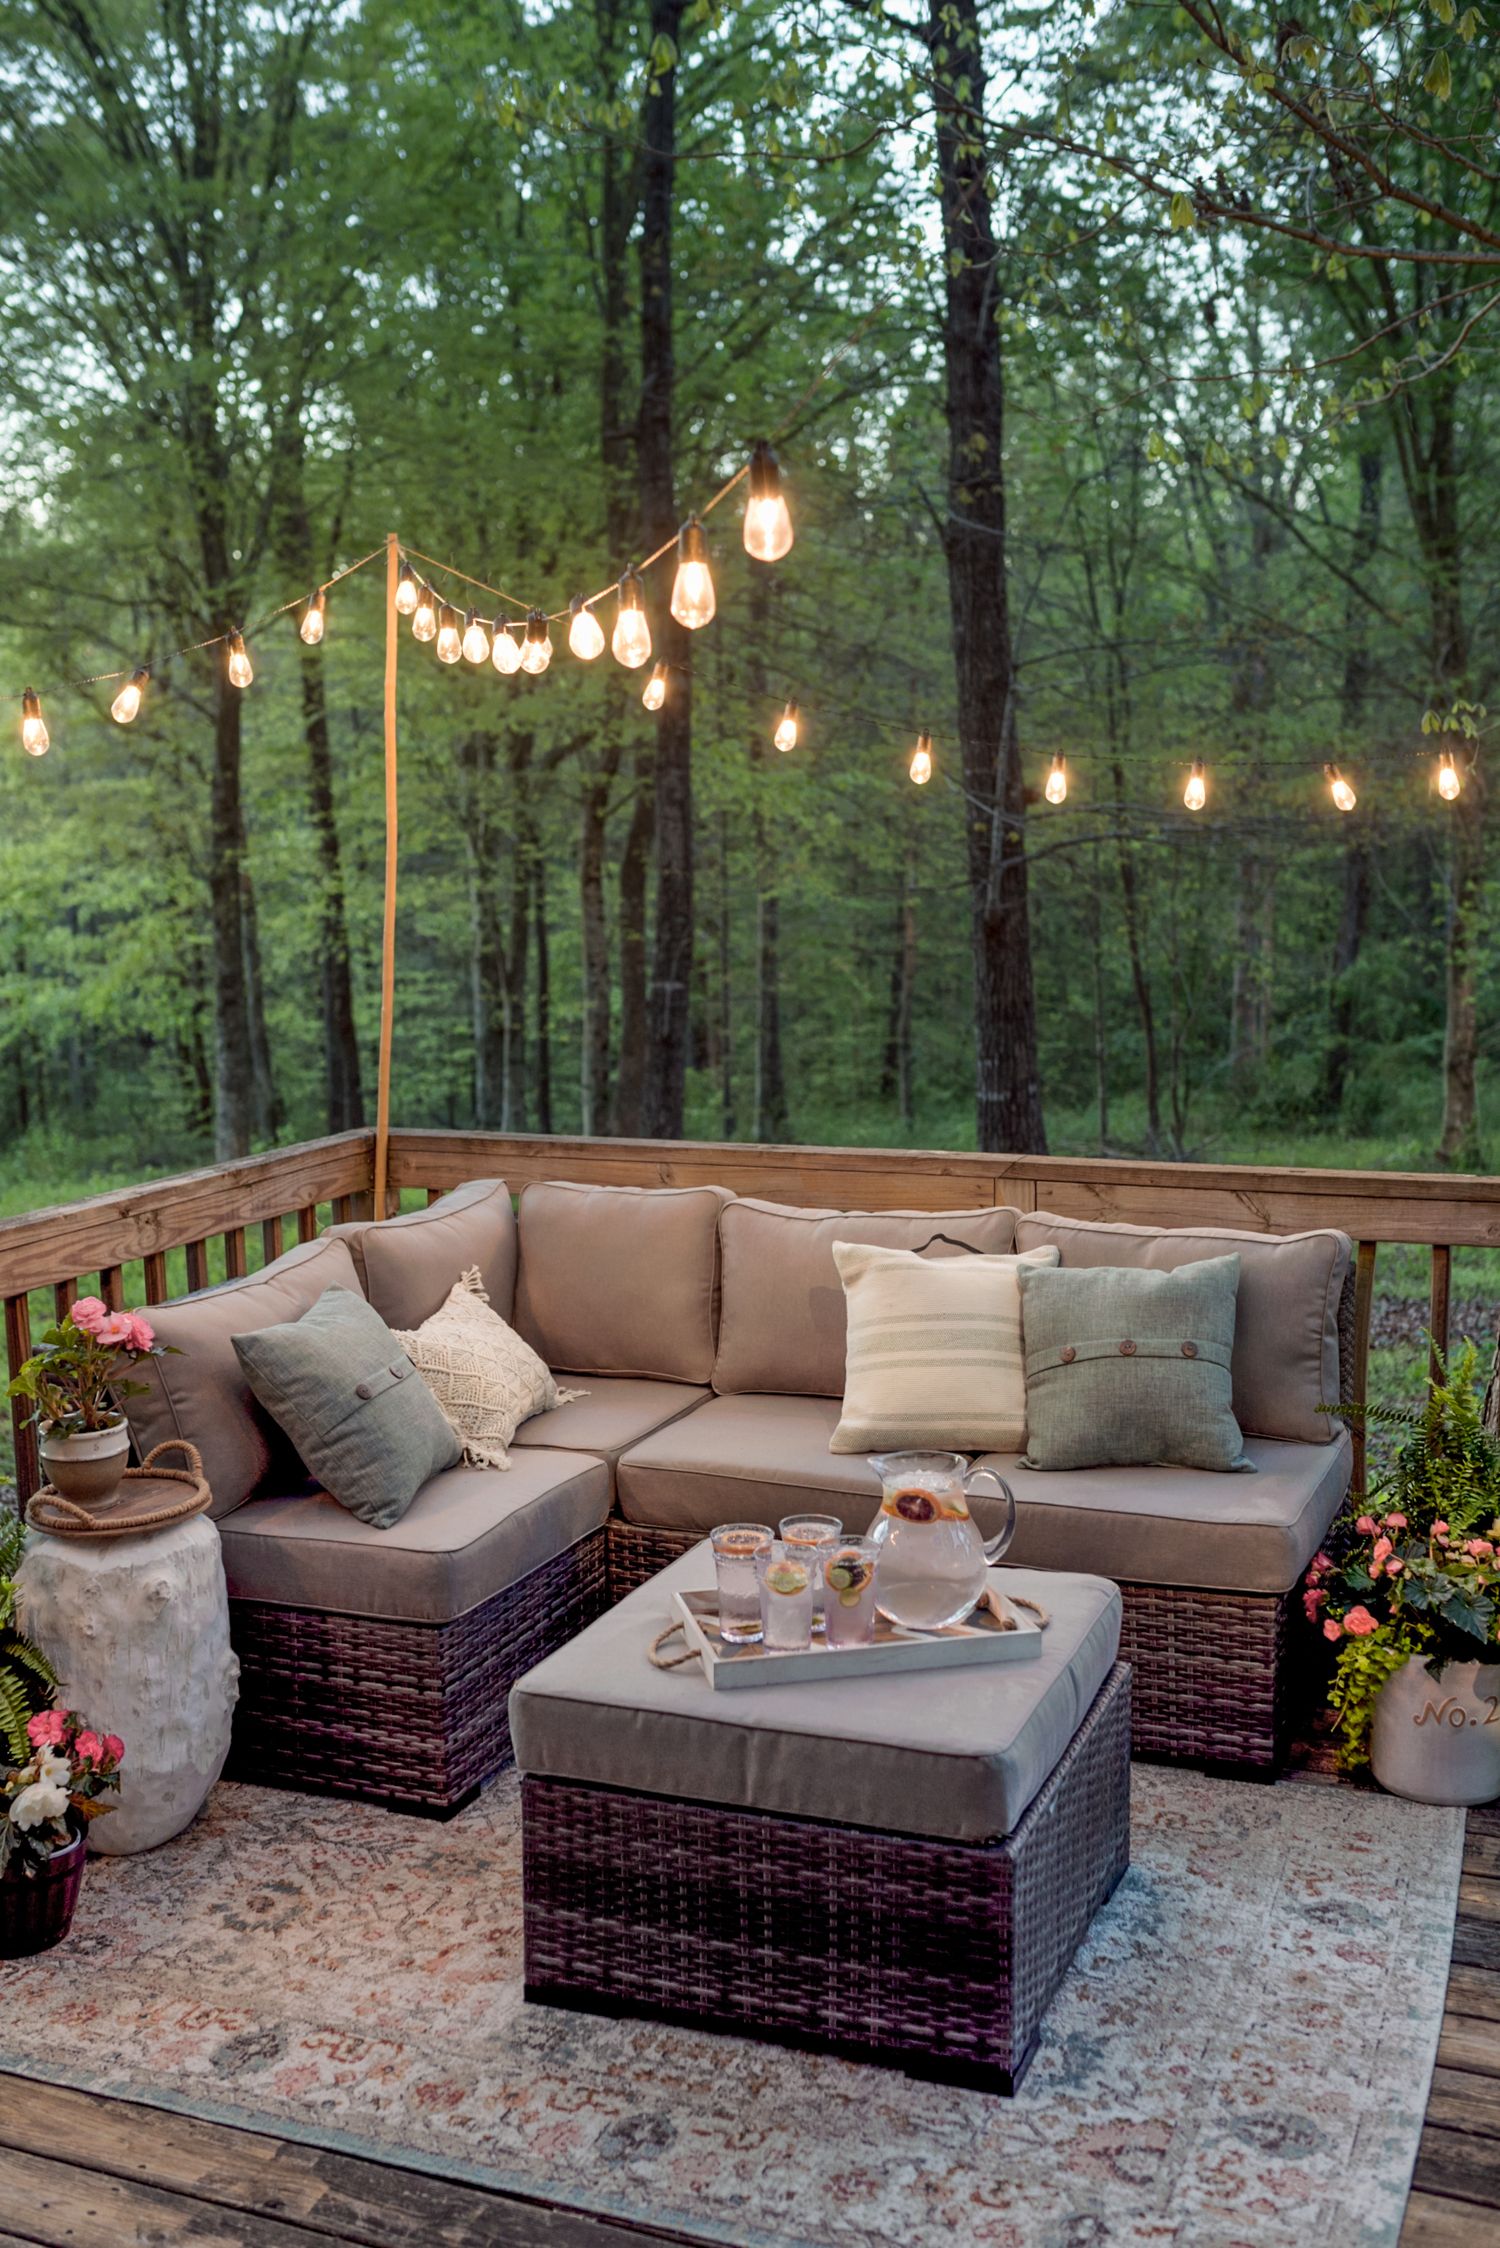 Cool And Practical Deck Decorating